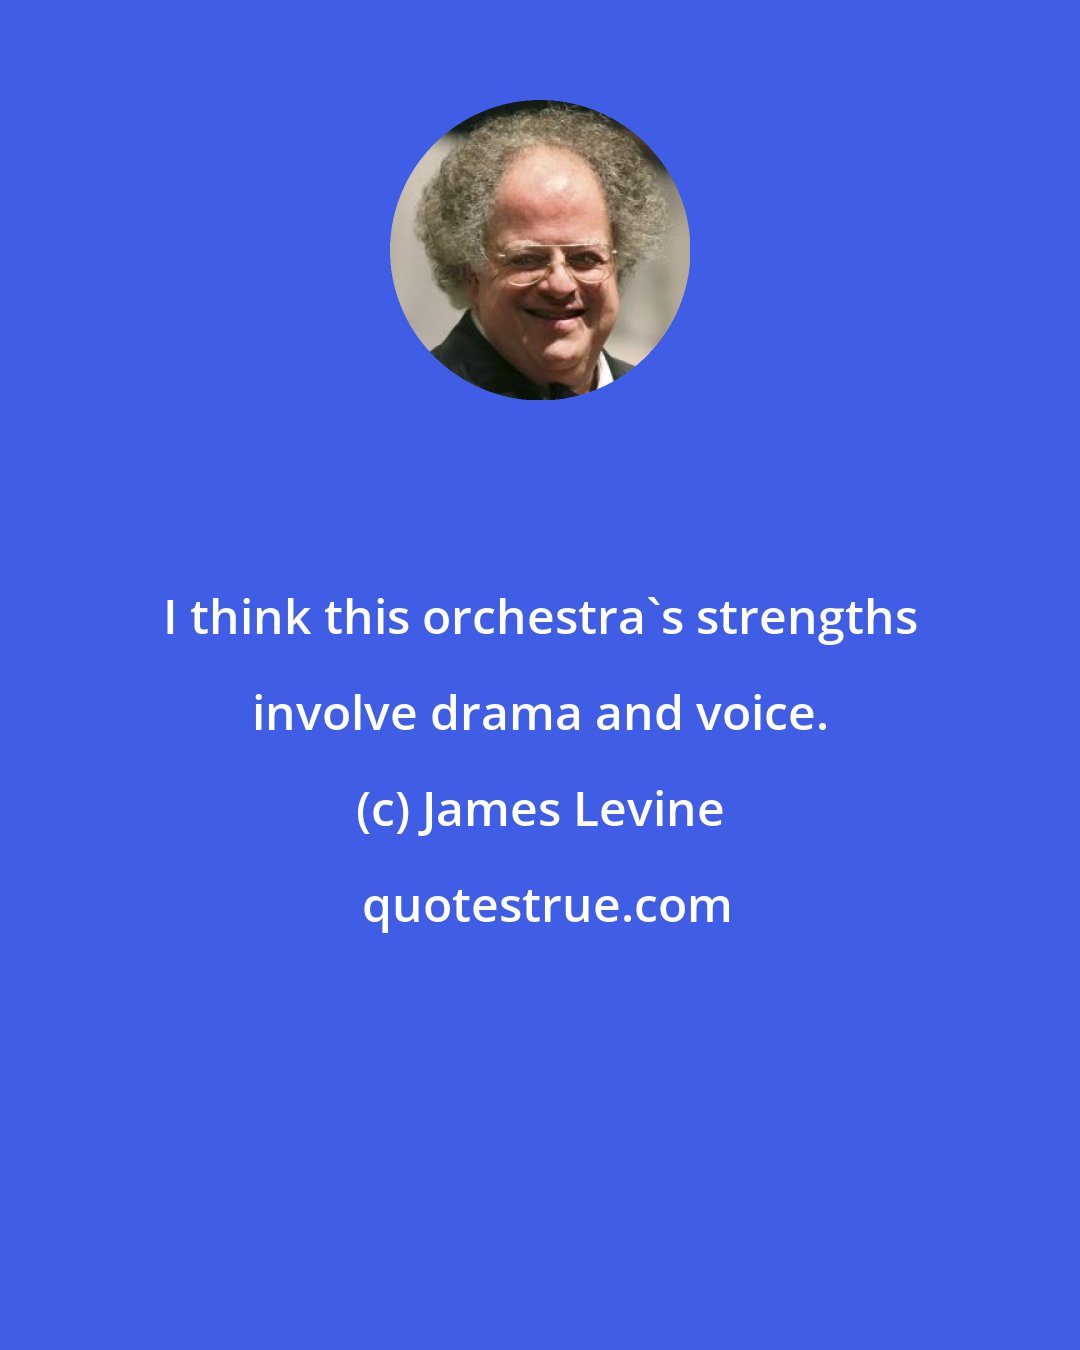 James Levine: I think this orchestra's strengths involve drama and voice.